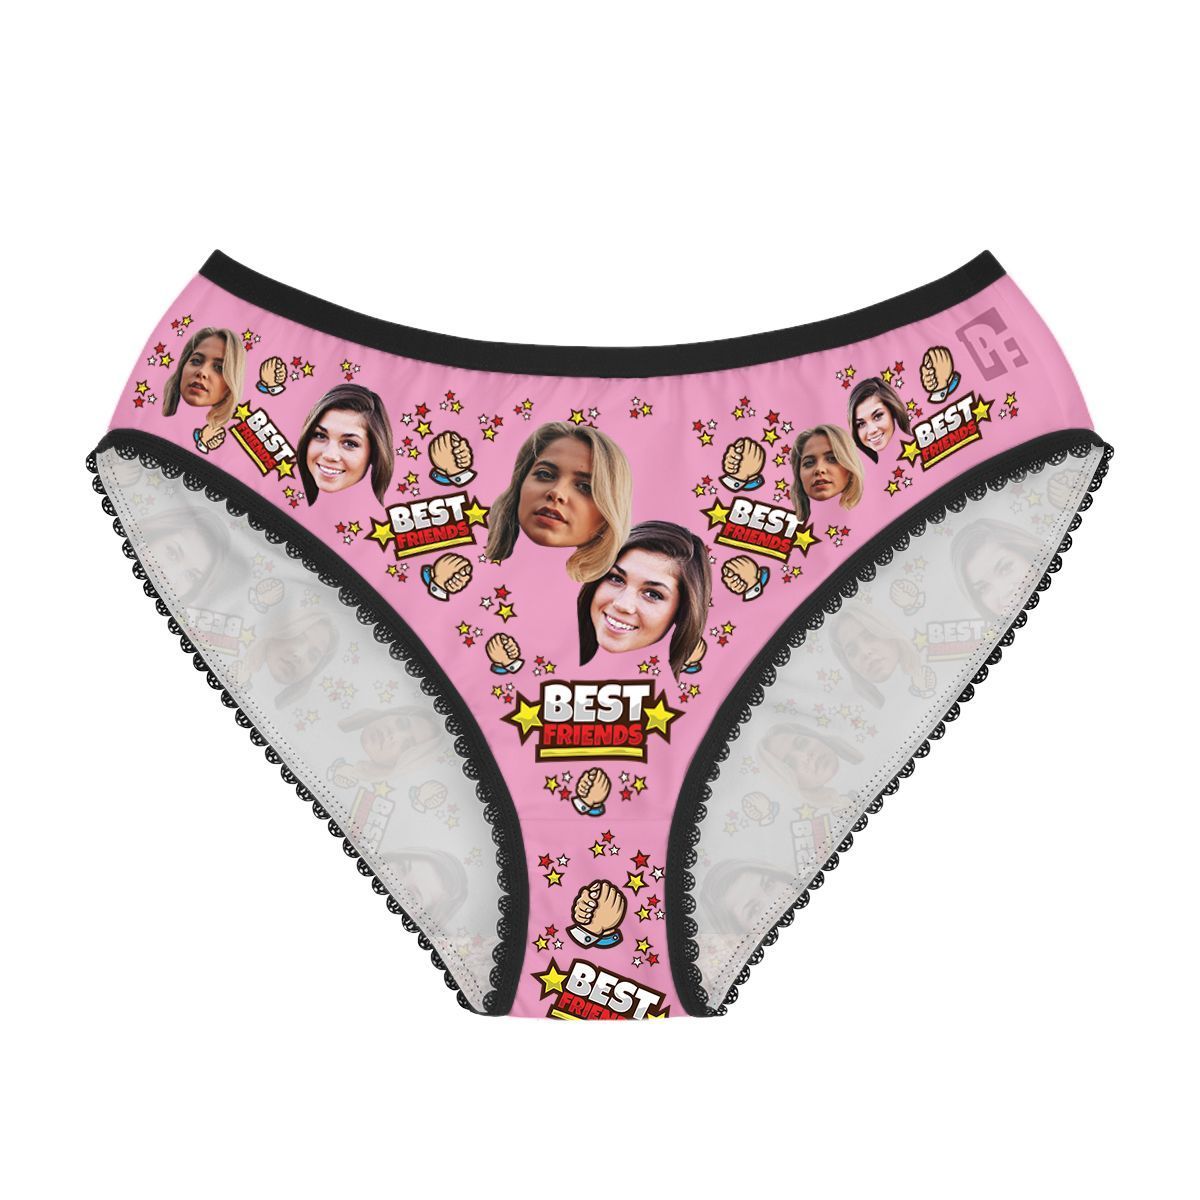 Pink Best Friends women's underwear briefs personalized with photo printed on them